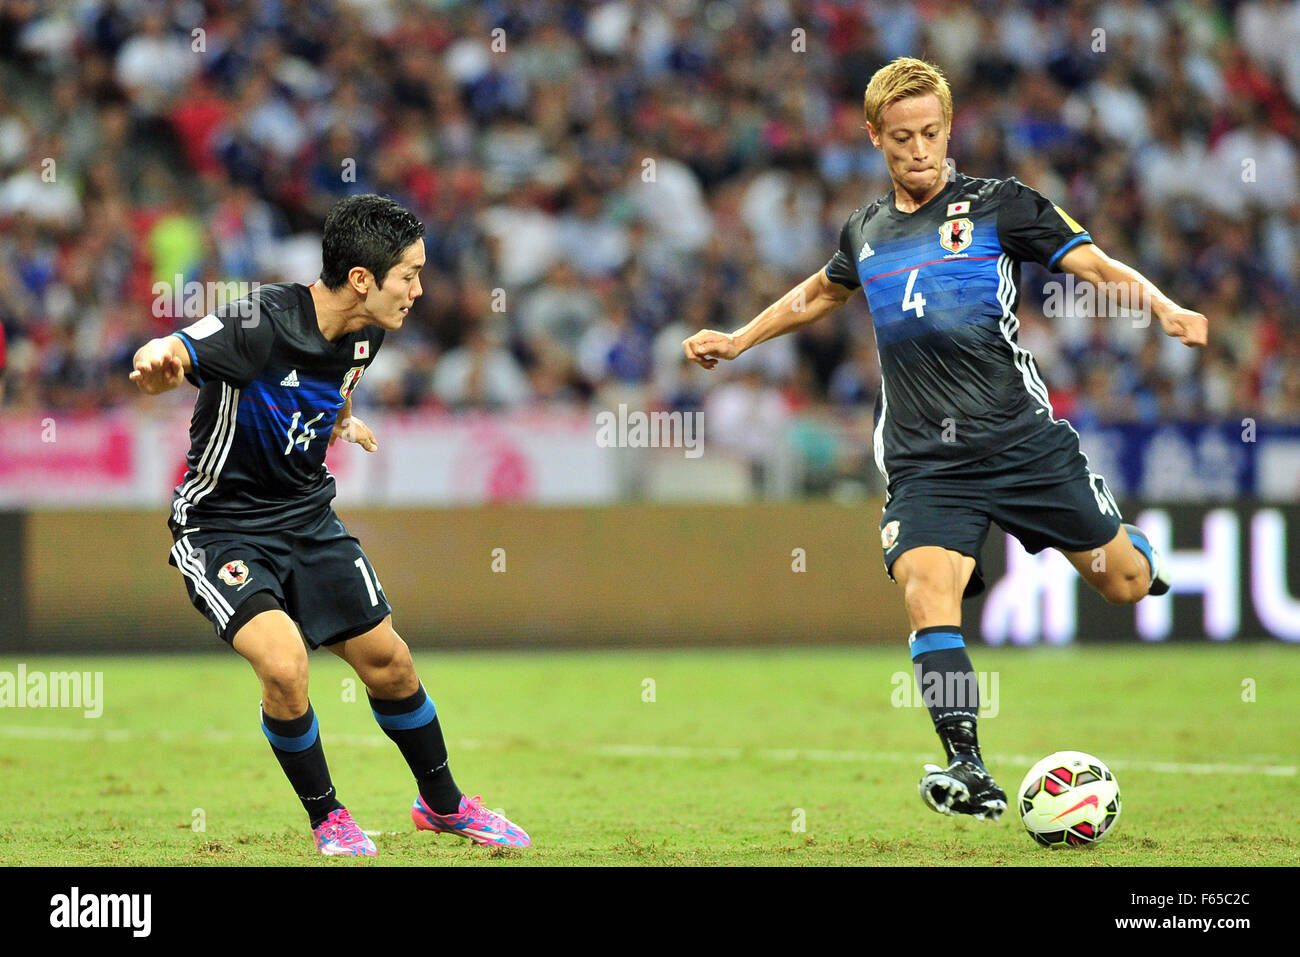 Singapore. 12th Nov, 2015. Japan's Keisuke Honda (R) shoots and scores during the 2018 FIFA World Cup Group E Asia qualifier match between Singapore and Japan in Singapore's National Stadium, Nov. 12, 2015. Credit:  Then Chih Wey/Xinhua/Alamy Live News Stock Photo